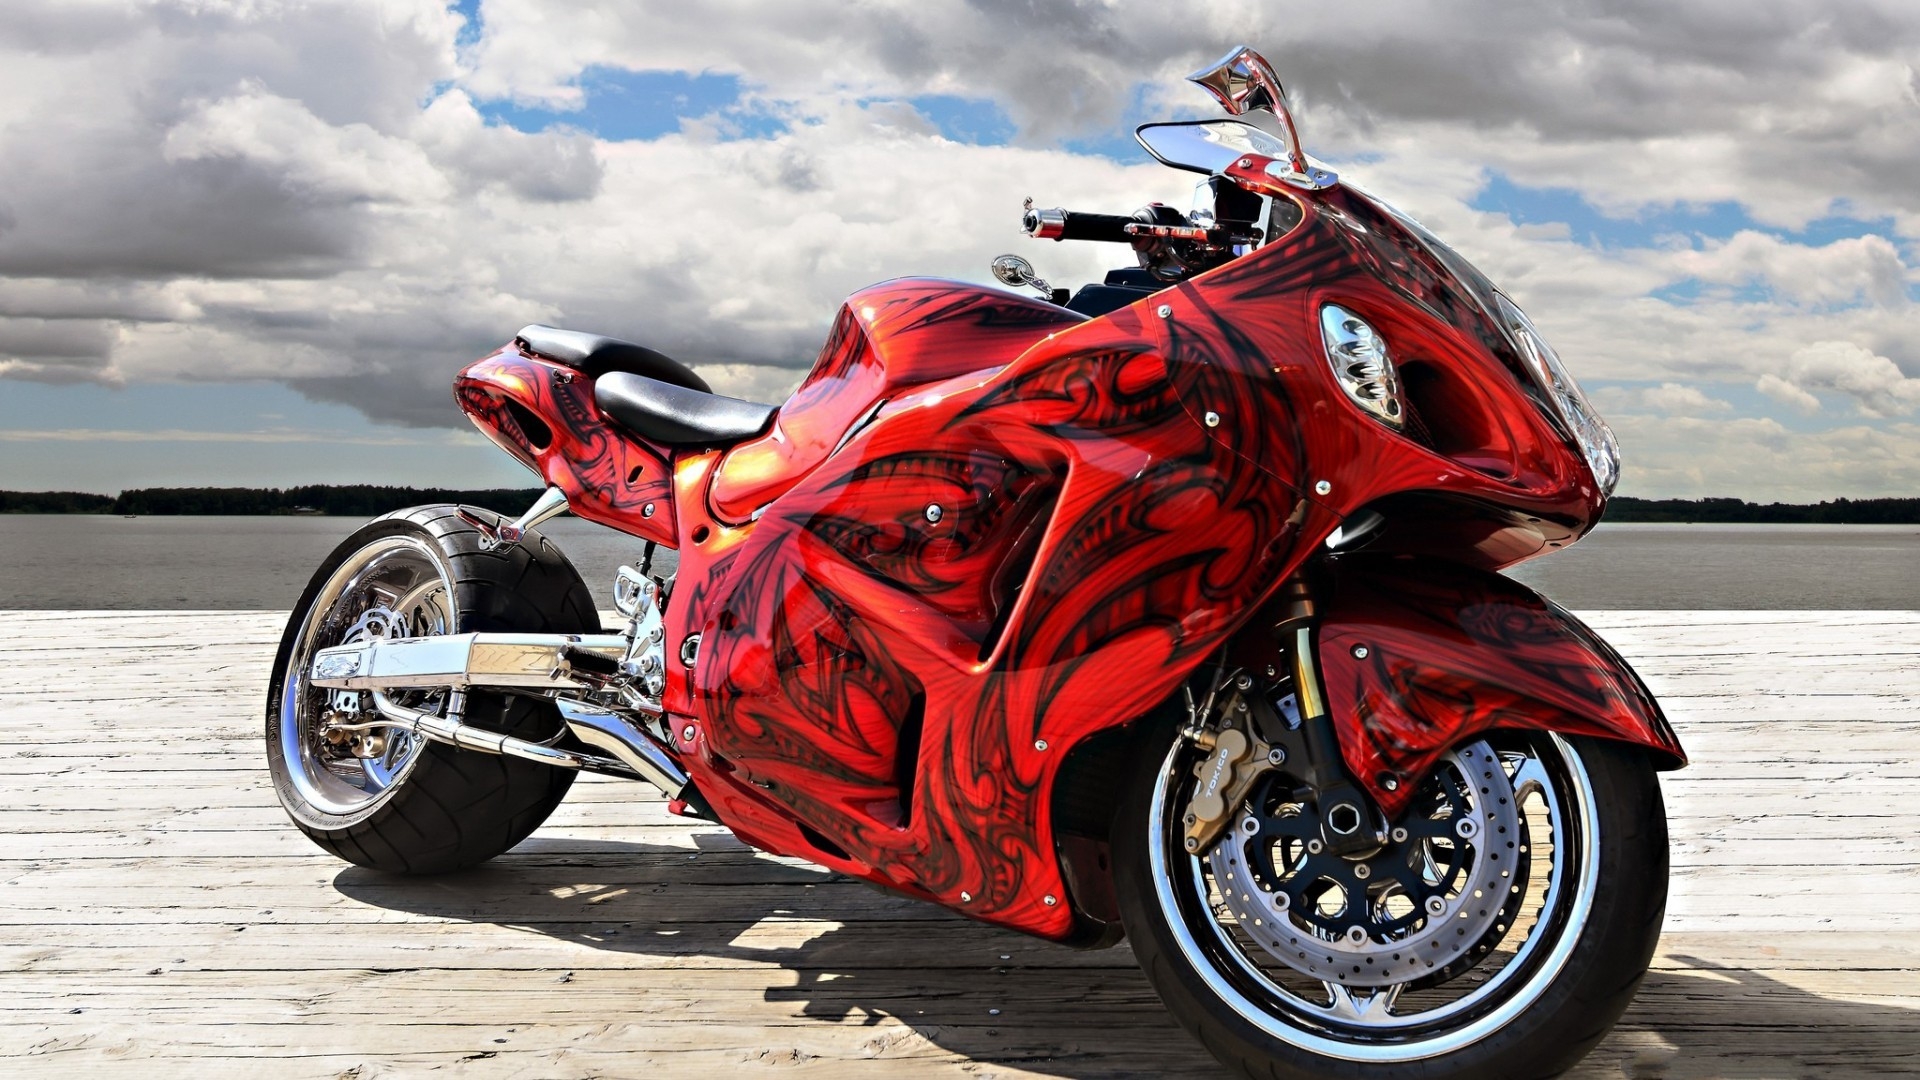 Gorgeous Red Motorcycle for 1920 x 1080 HDTV 1080p resolution